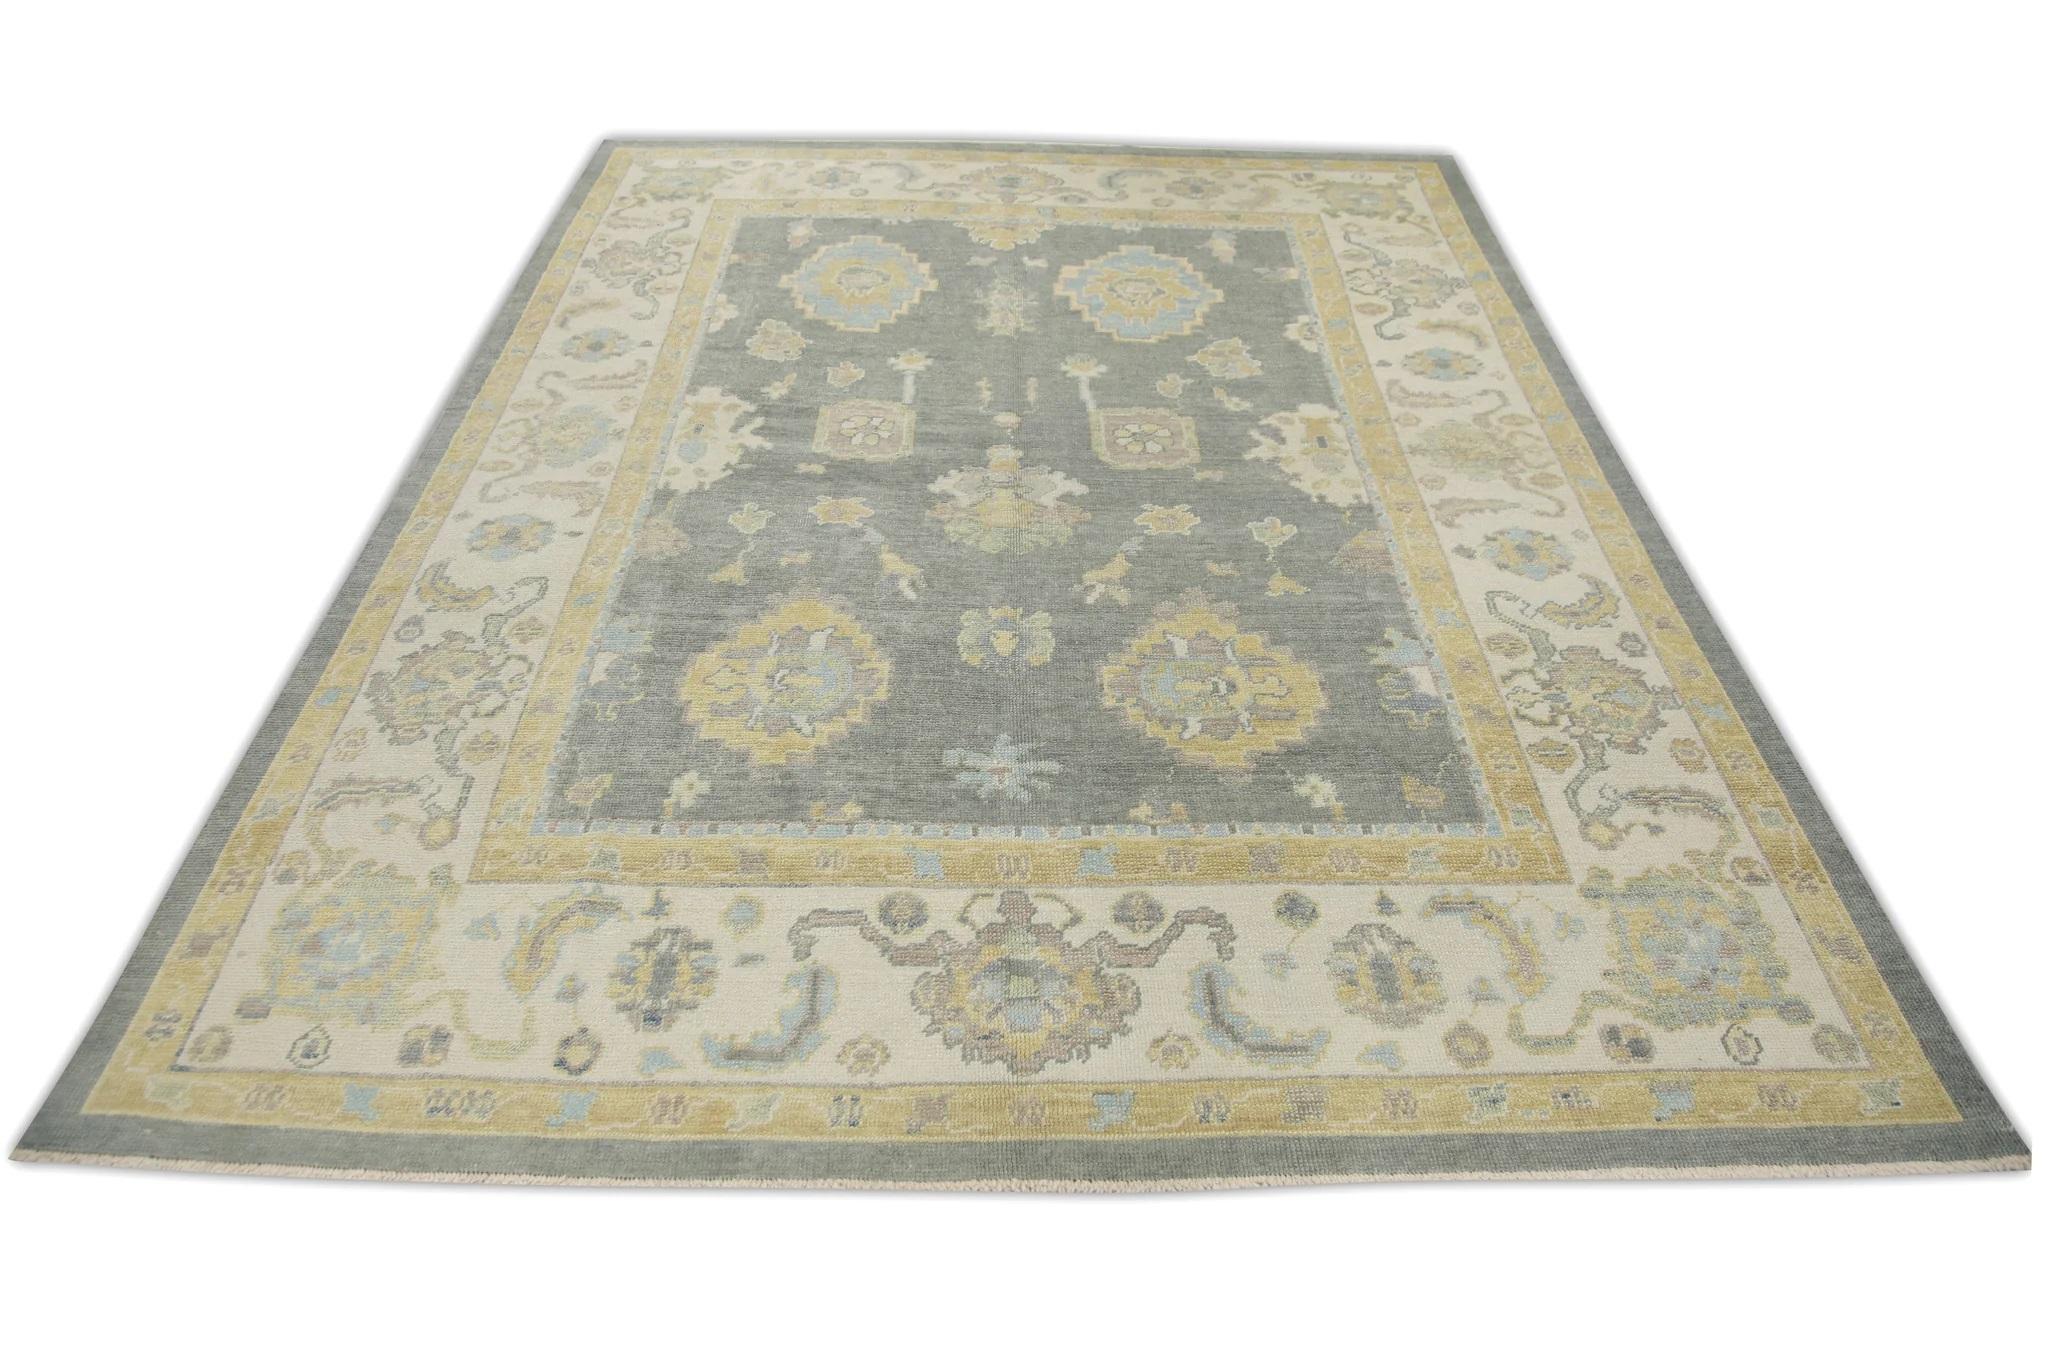 Gray & Yellow Handwoven Wool Turkish Oushak Rug in Floral Design 7'11